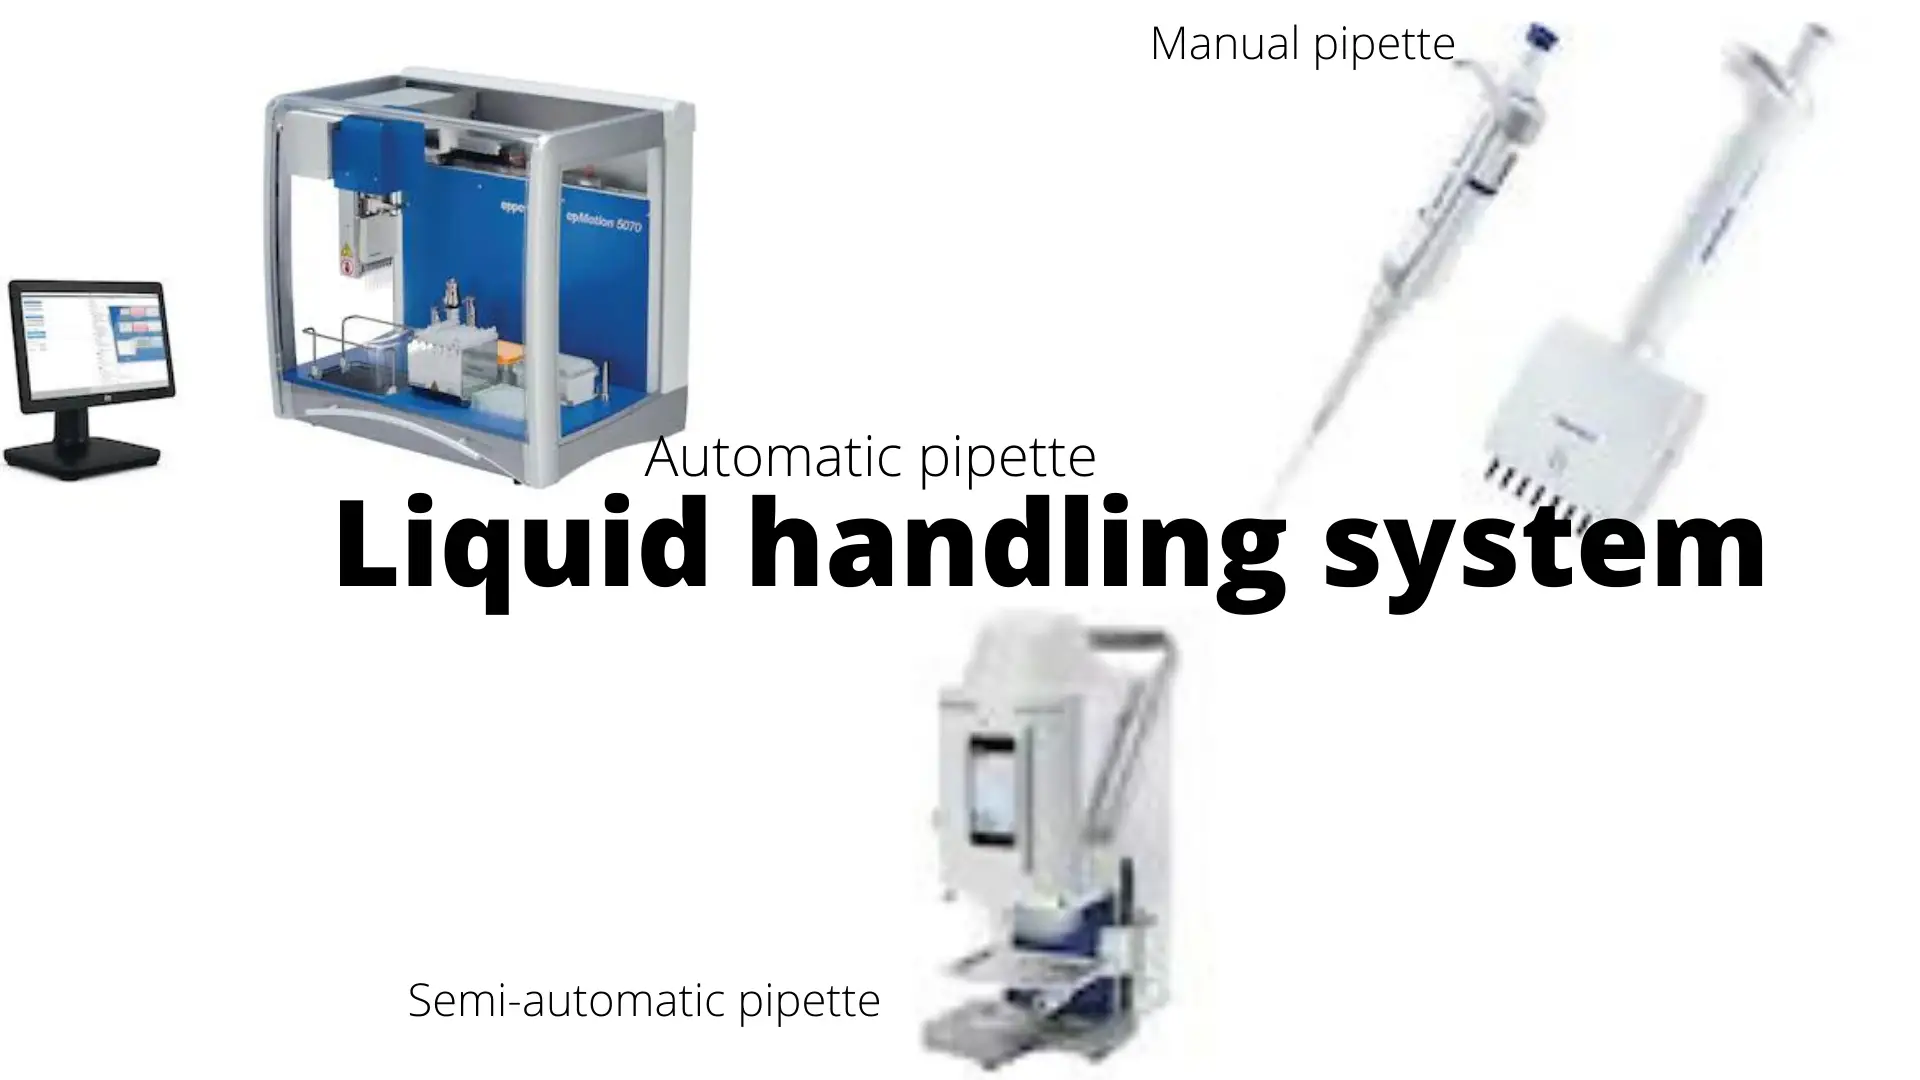 Automated Pipette: Liquid Handling System